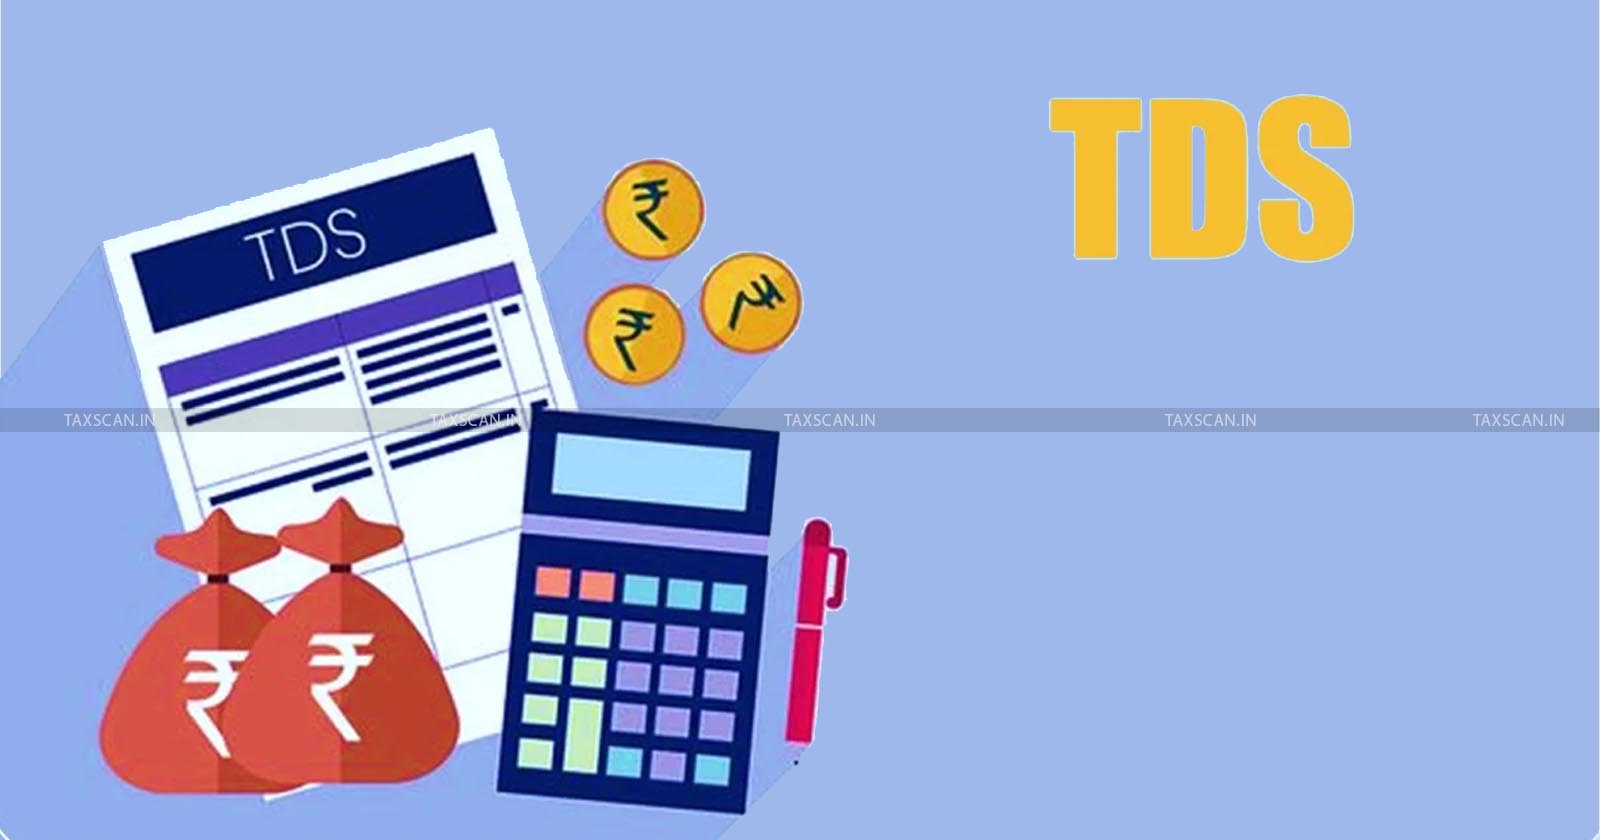 Once TDS is Deducte - Non-Deposit of TDS by Deductor - Deductee ITAT - TAXSCAN